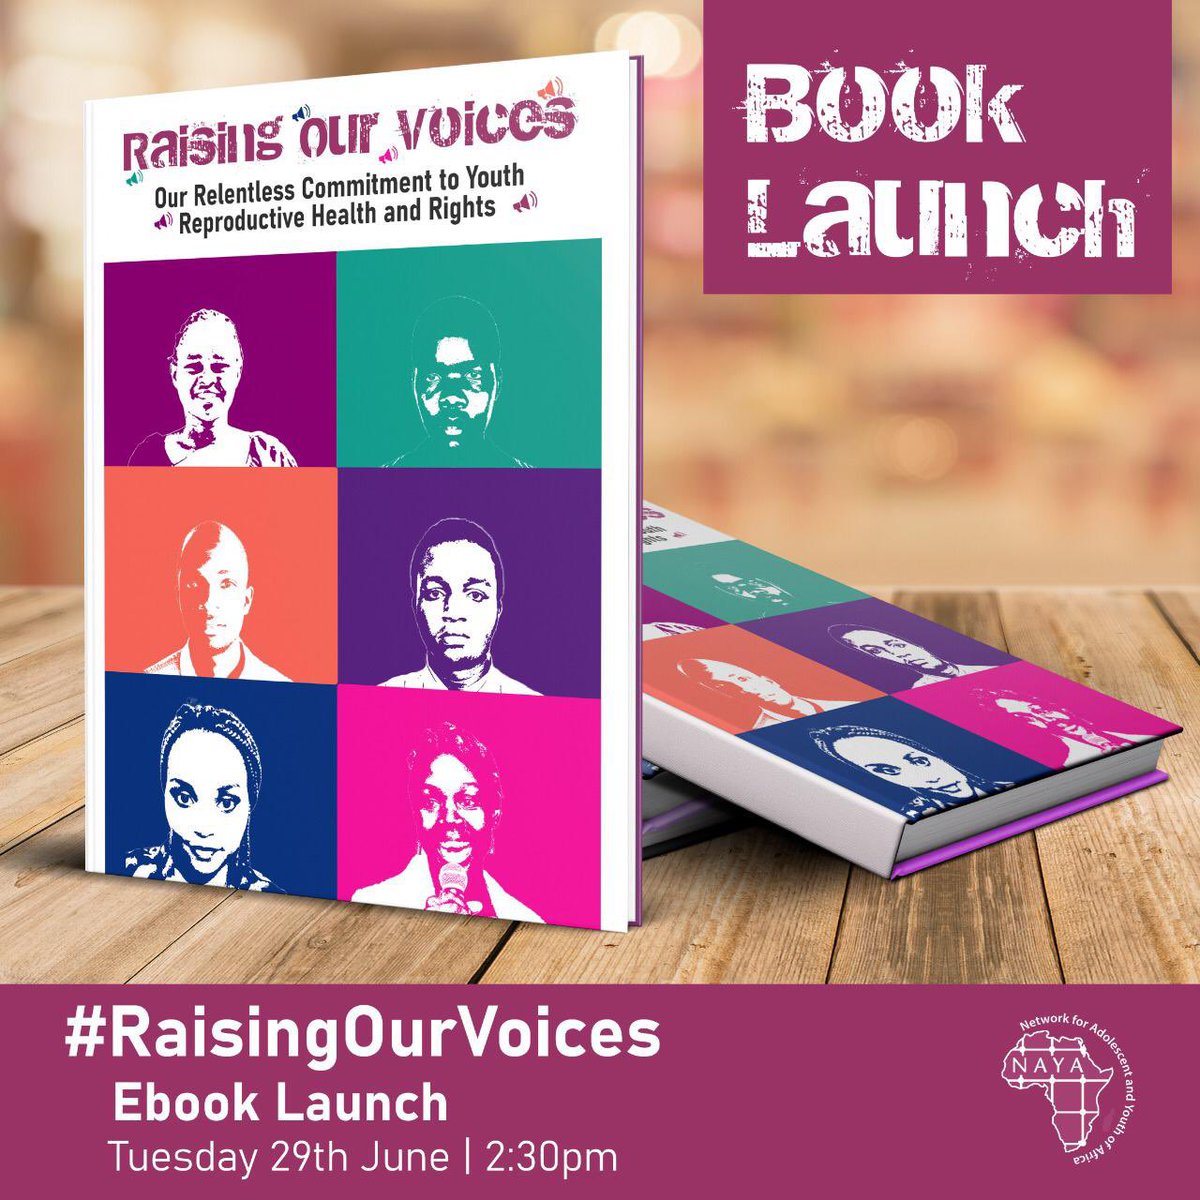 The launch of 📙 #RaisingOurVoices 📙 on 💊Sexual 💉 Reproductive 🩺Health ⛑️ Rights ⚖️ by our own @Eve_odhis will be held tomorrow 29th June 2021. 

Book your seat & copy now.